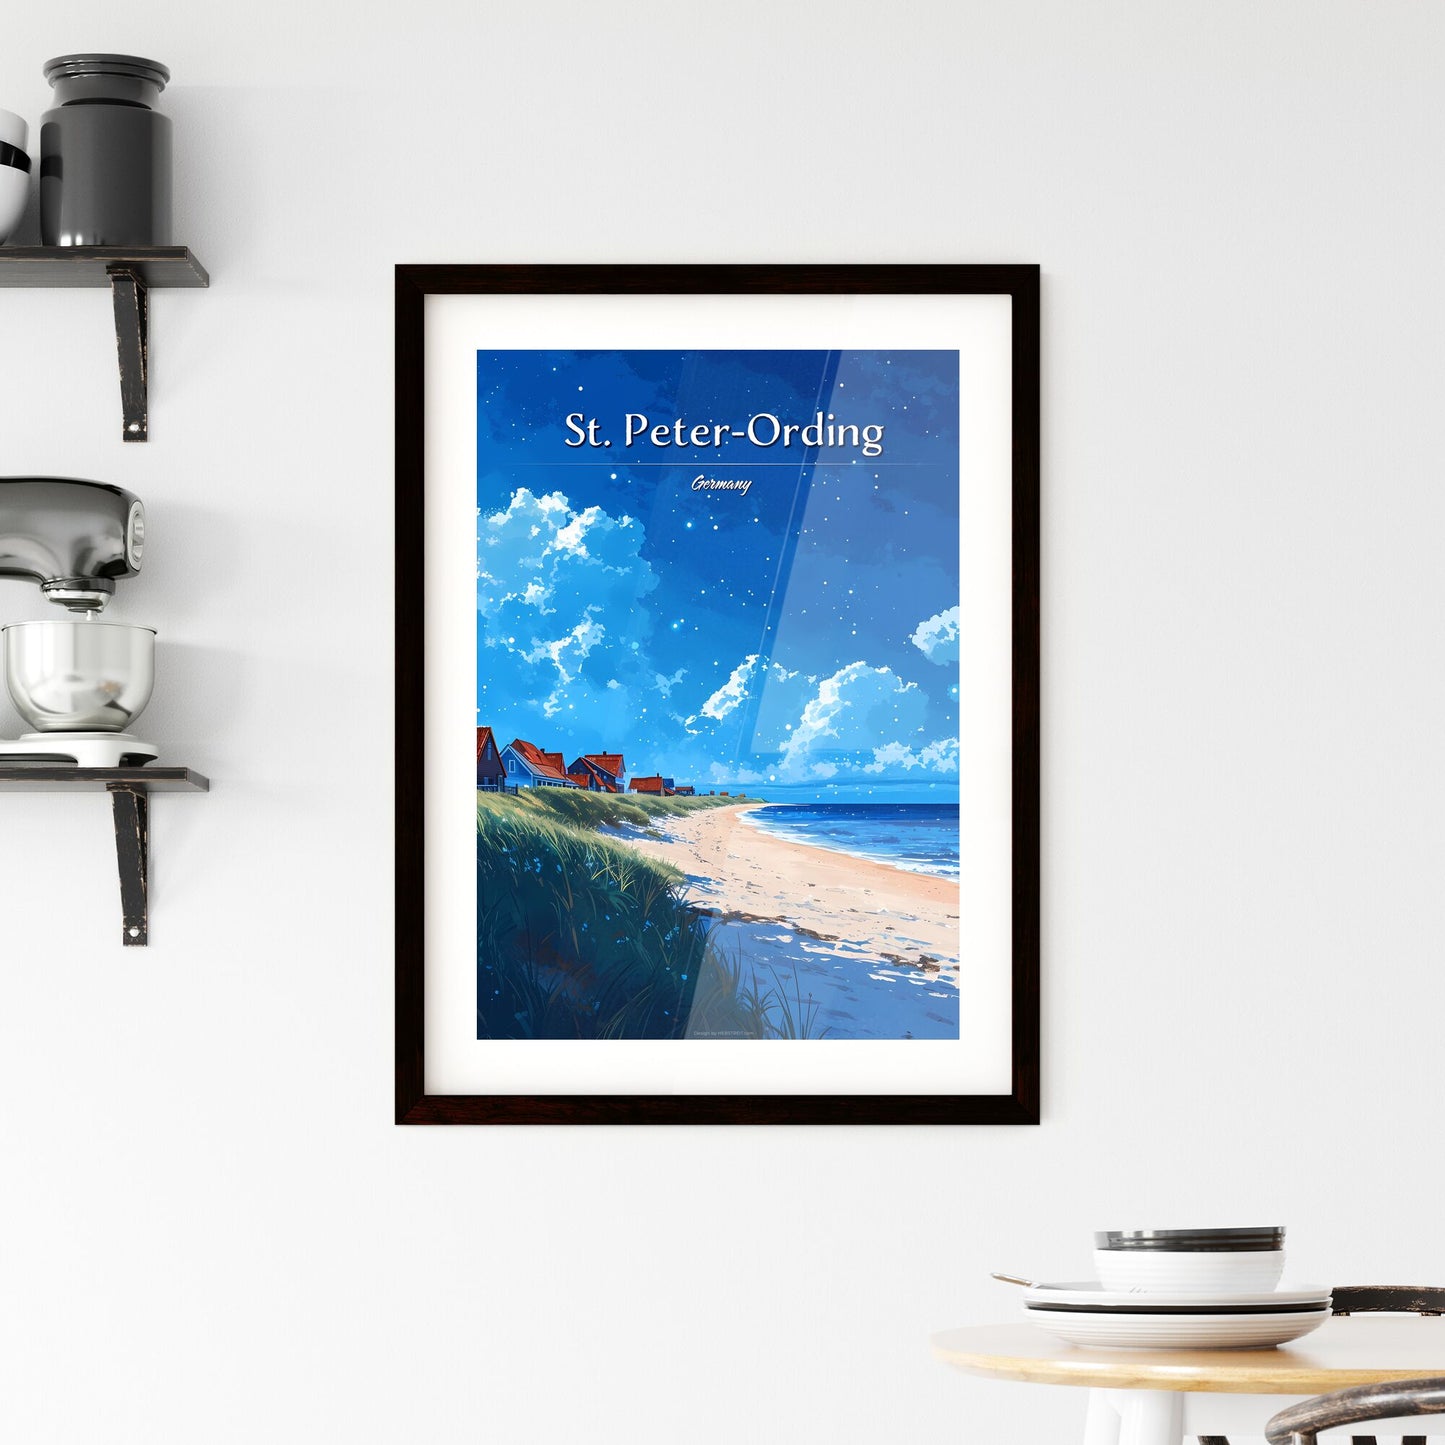 St. Peter-Ording Beach, Germany (North Sea) - Art print of a beach with houses and grass Default Title